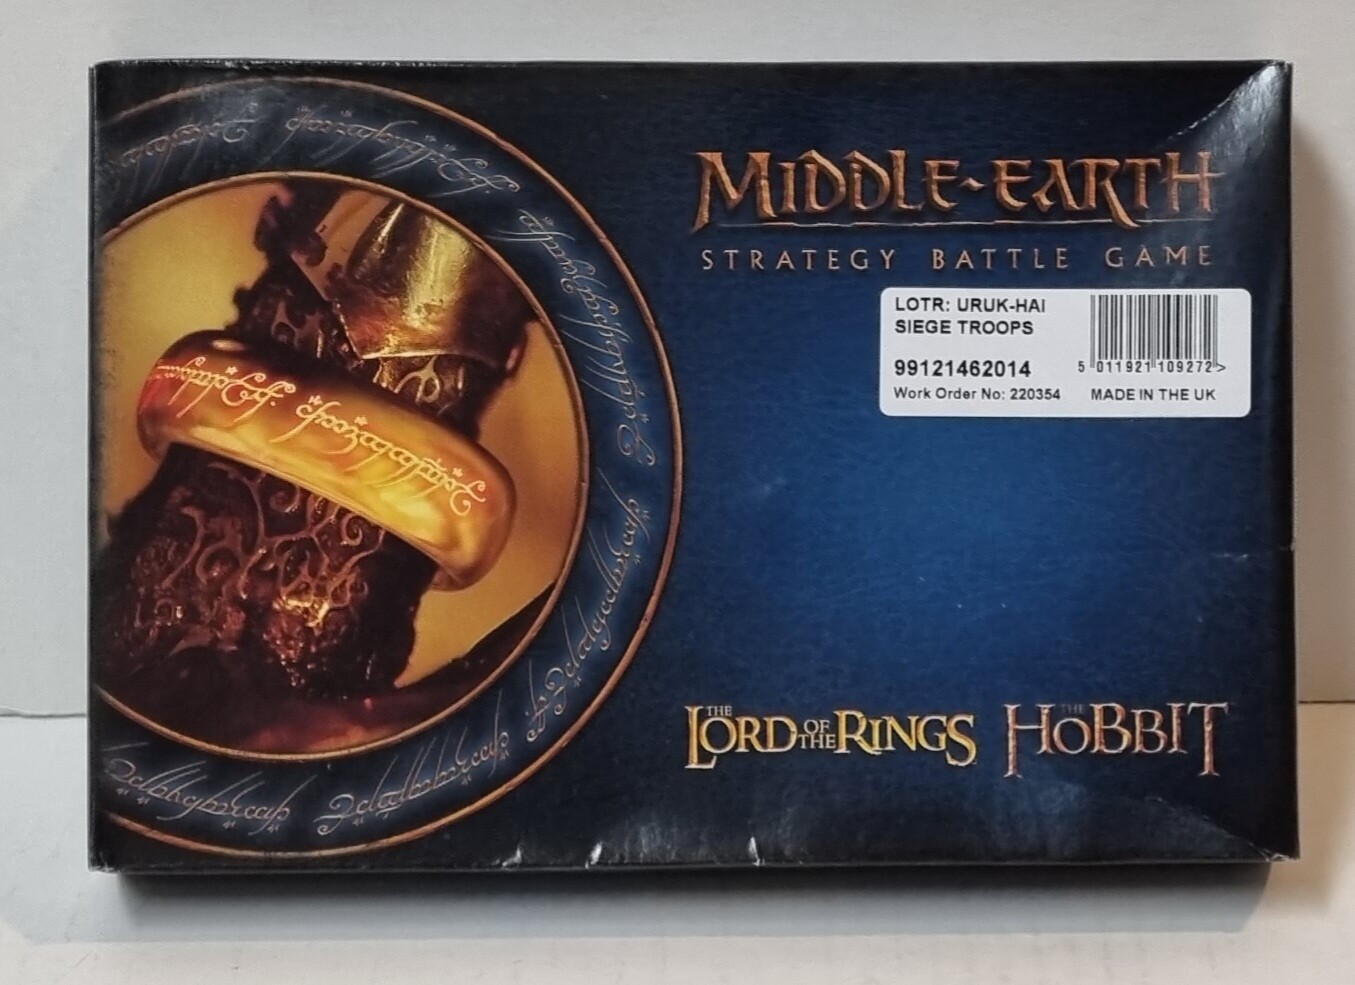 Middle-Earth, 99121462014, Uruk-Hai Siege Troops, Lord of the Rings